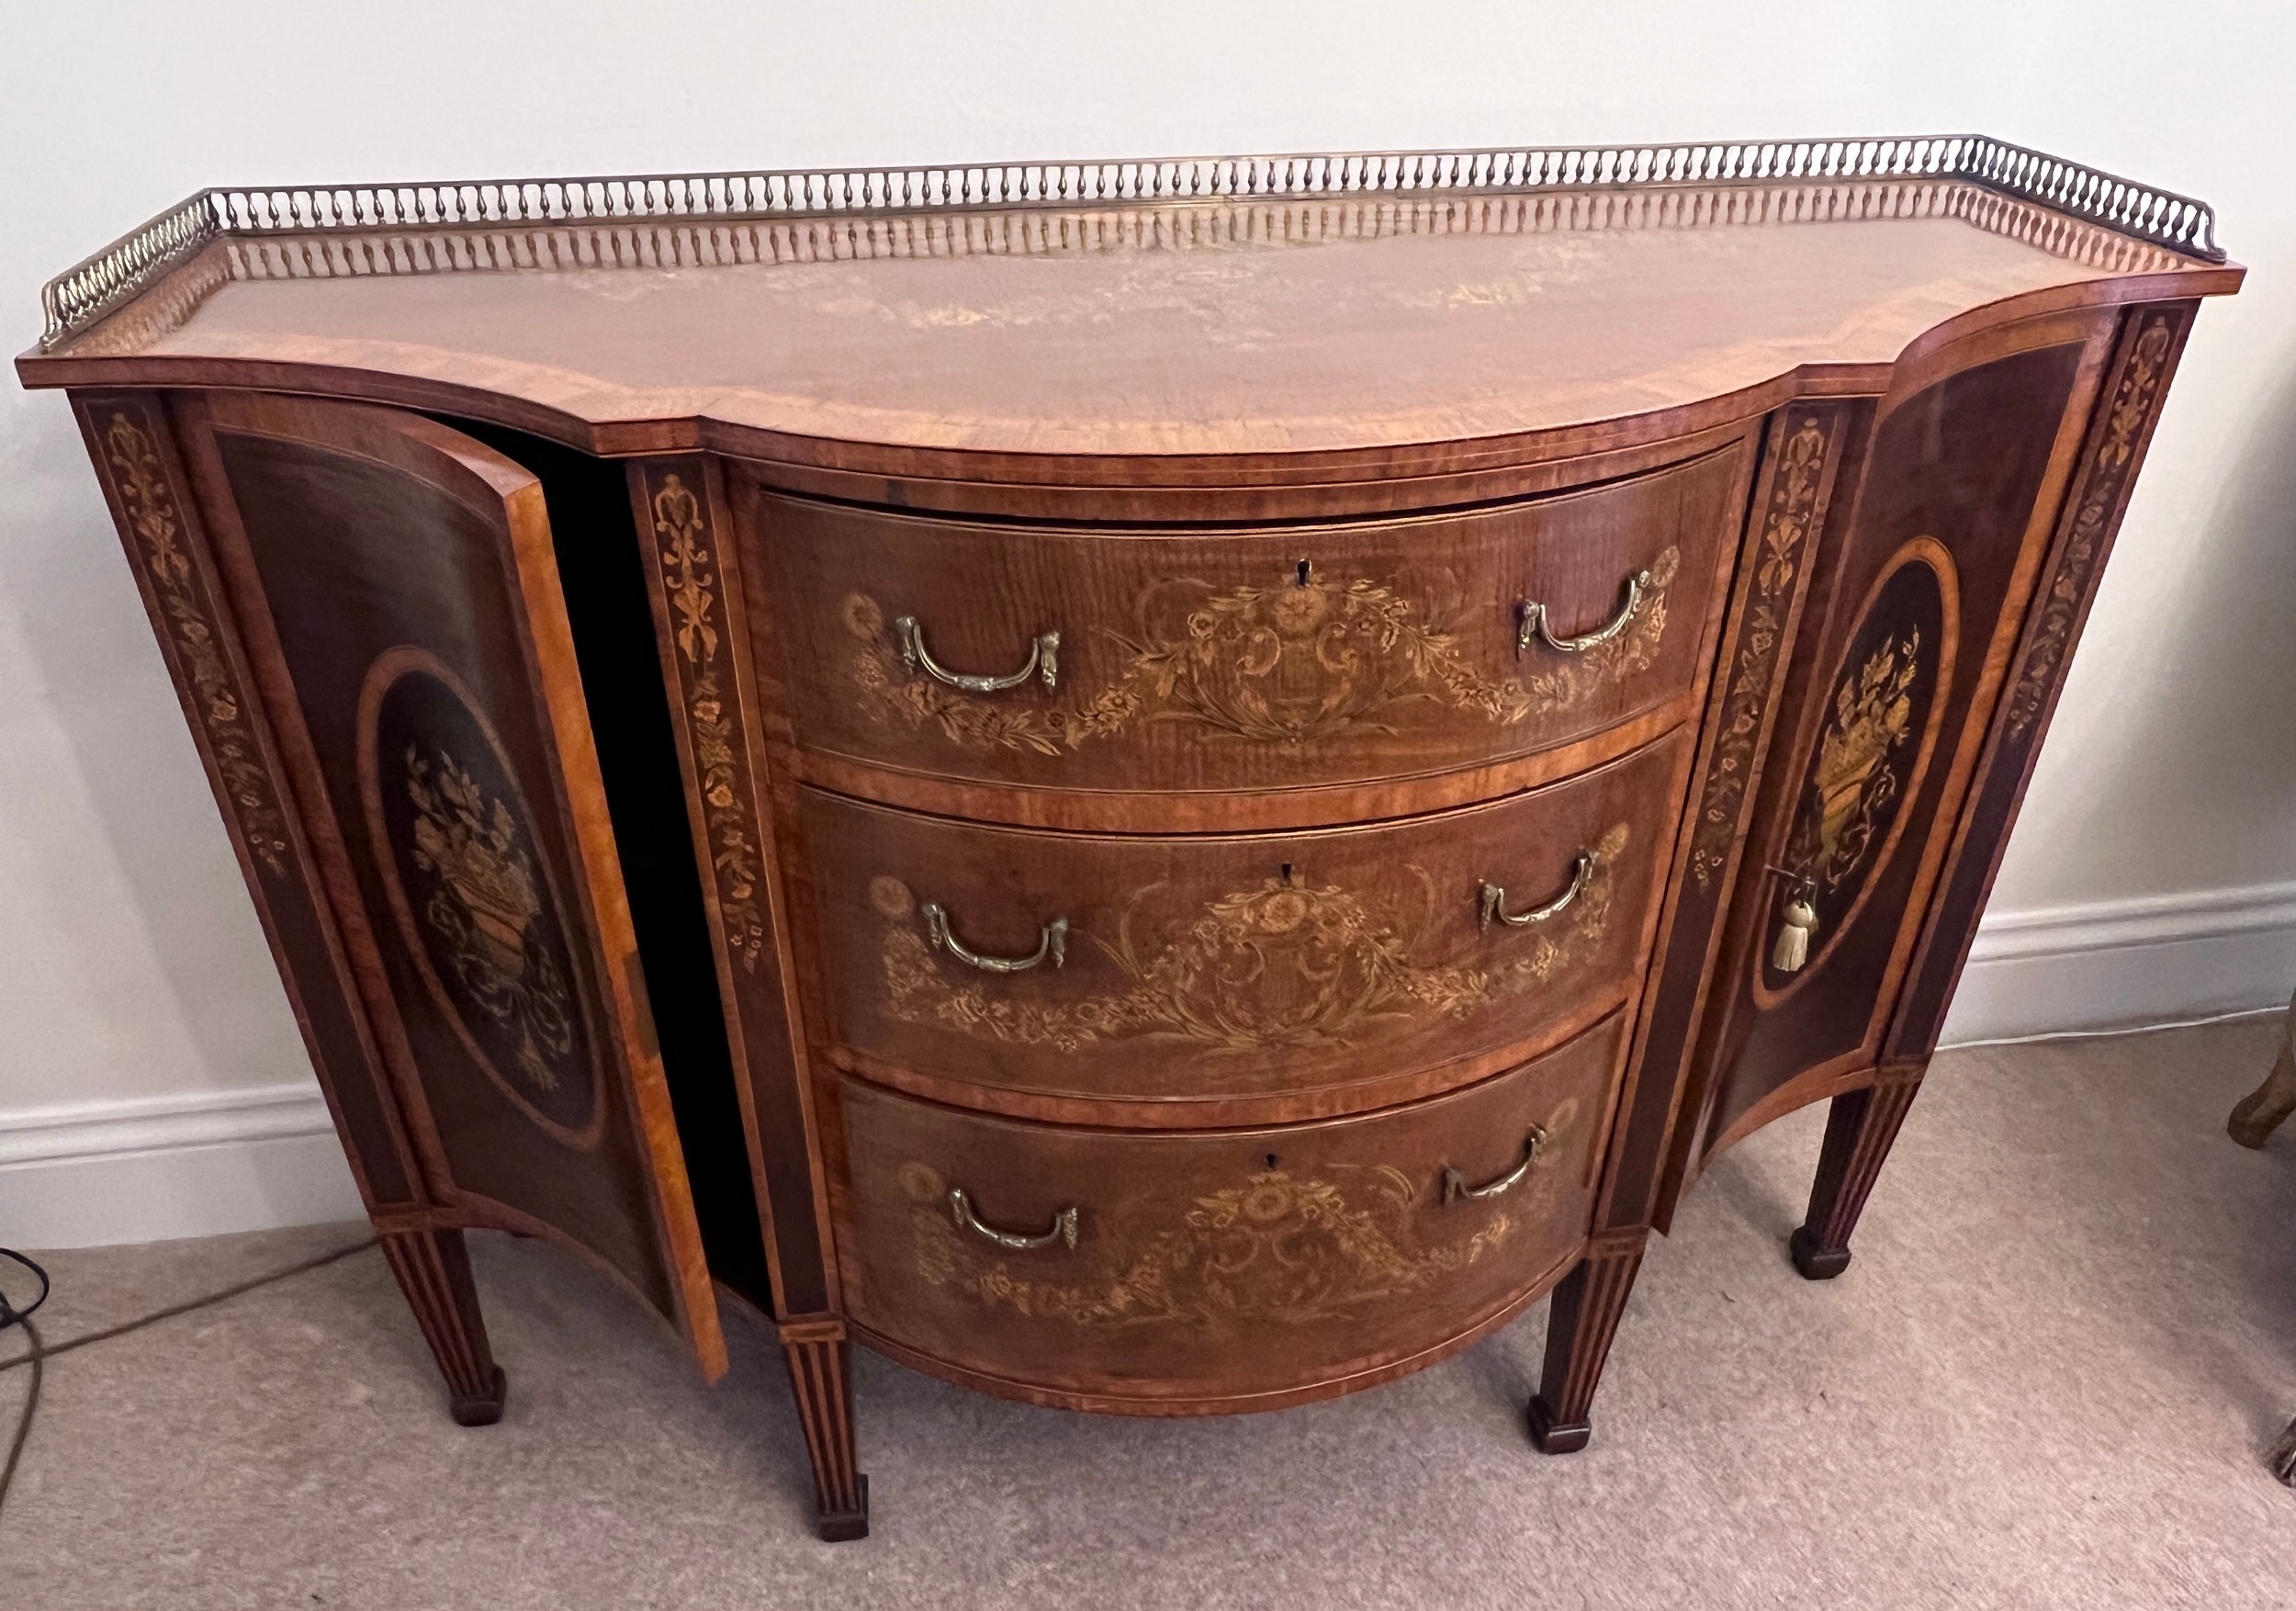 A 19thC continental fine quality breakfront marquetry side cabinet with various woods including